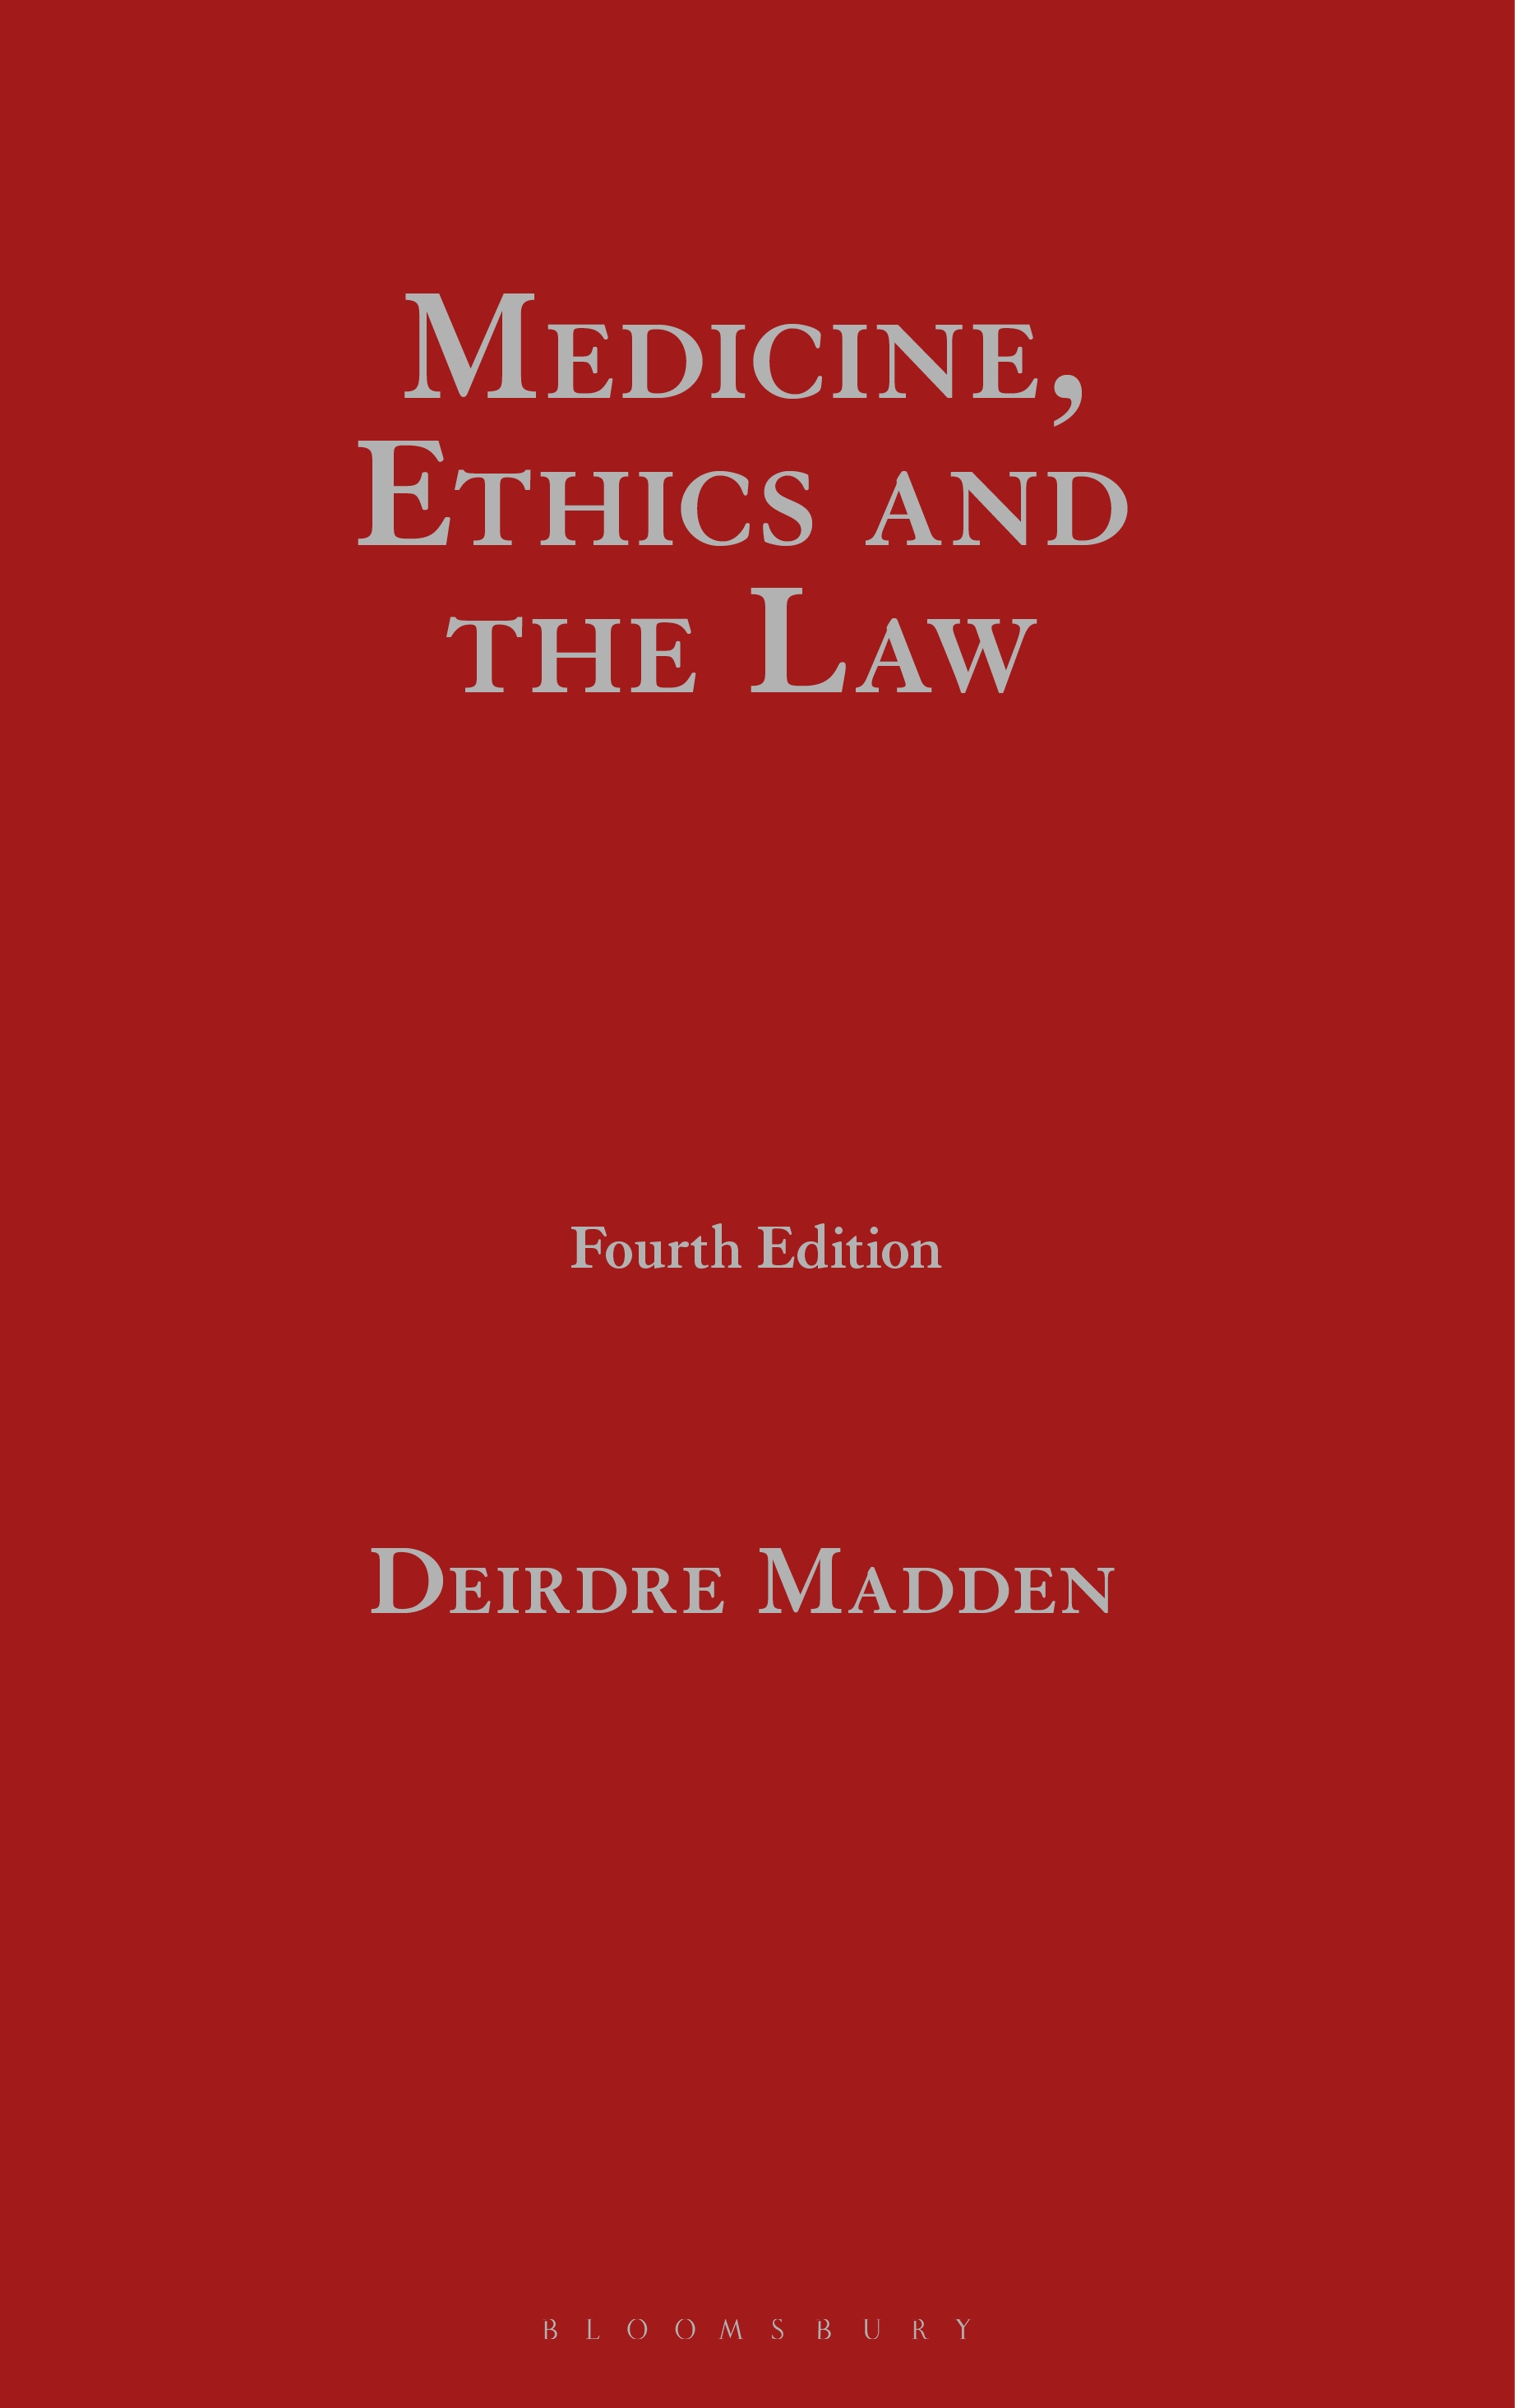 Medicine, Ethics and the Law book jacket